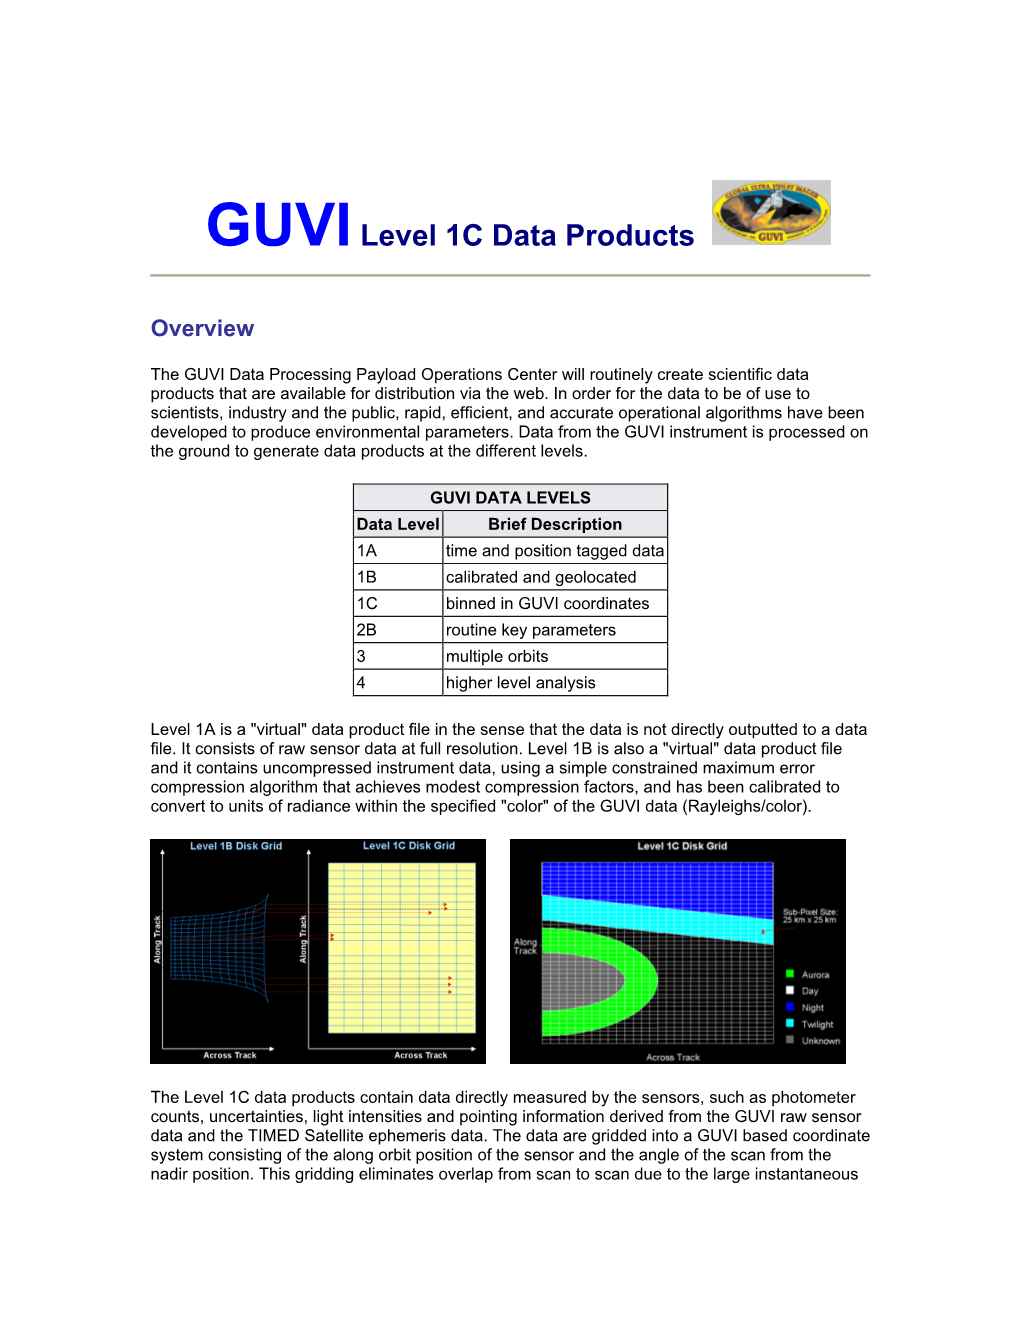 Information Derived from the GUVI Raw Sensor Data and the TIMED Satellite Ephemeris Data